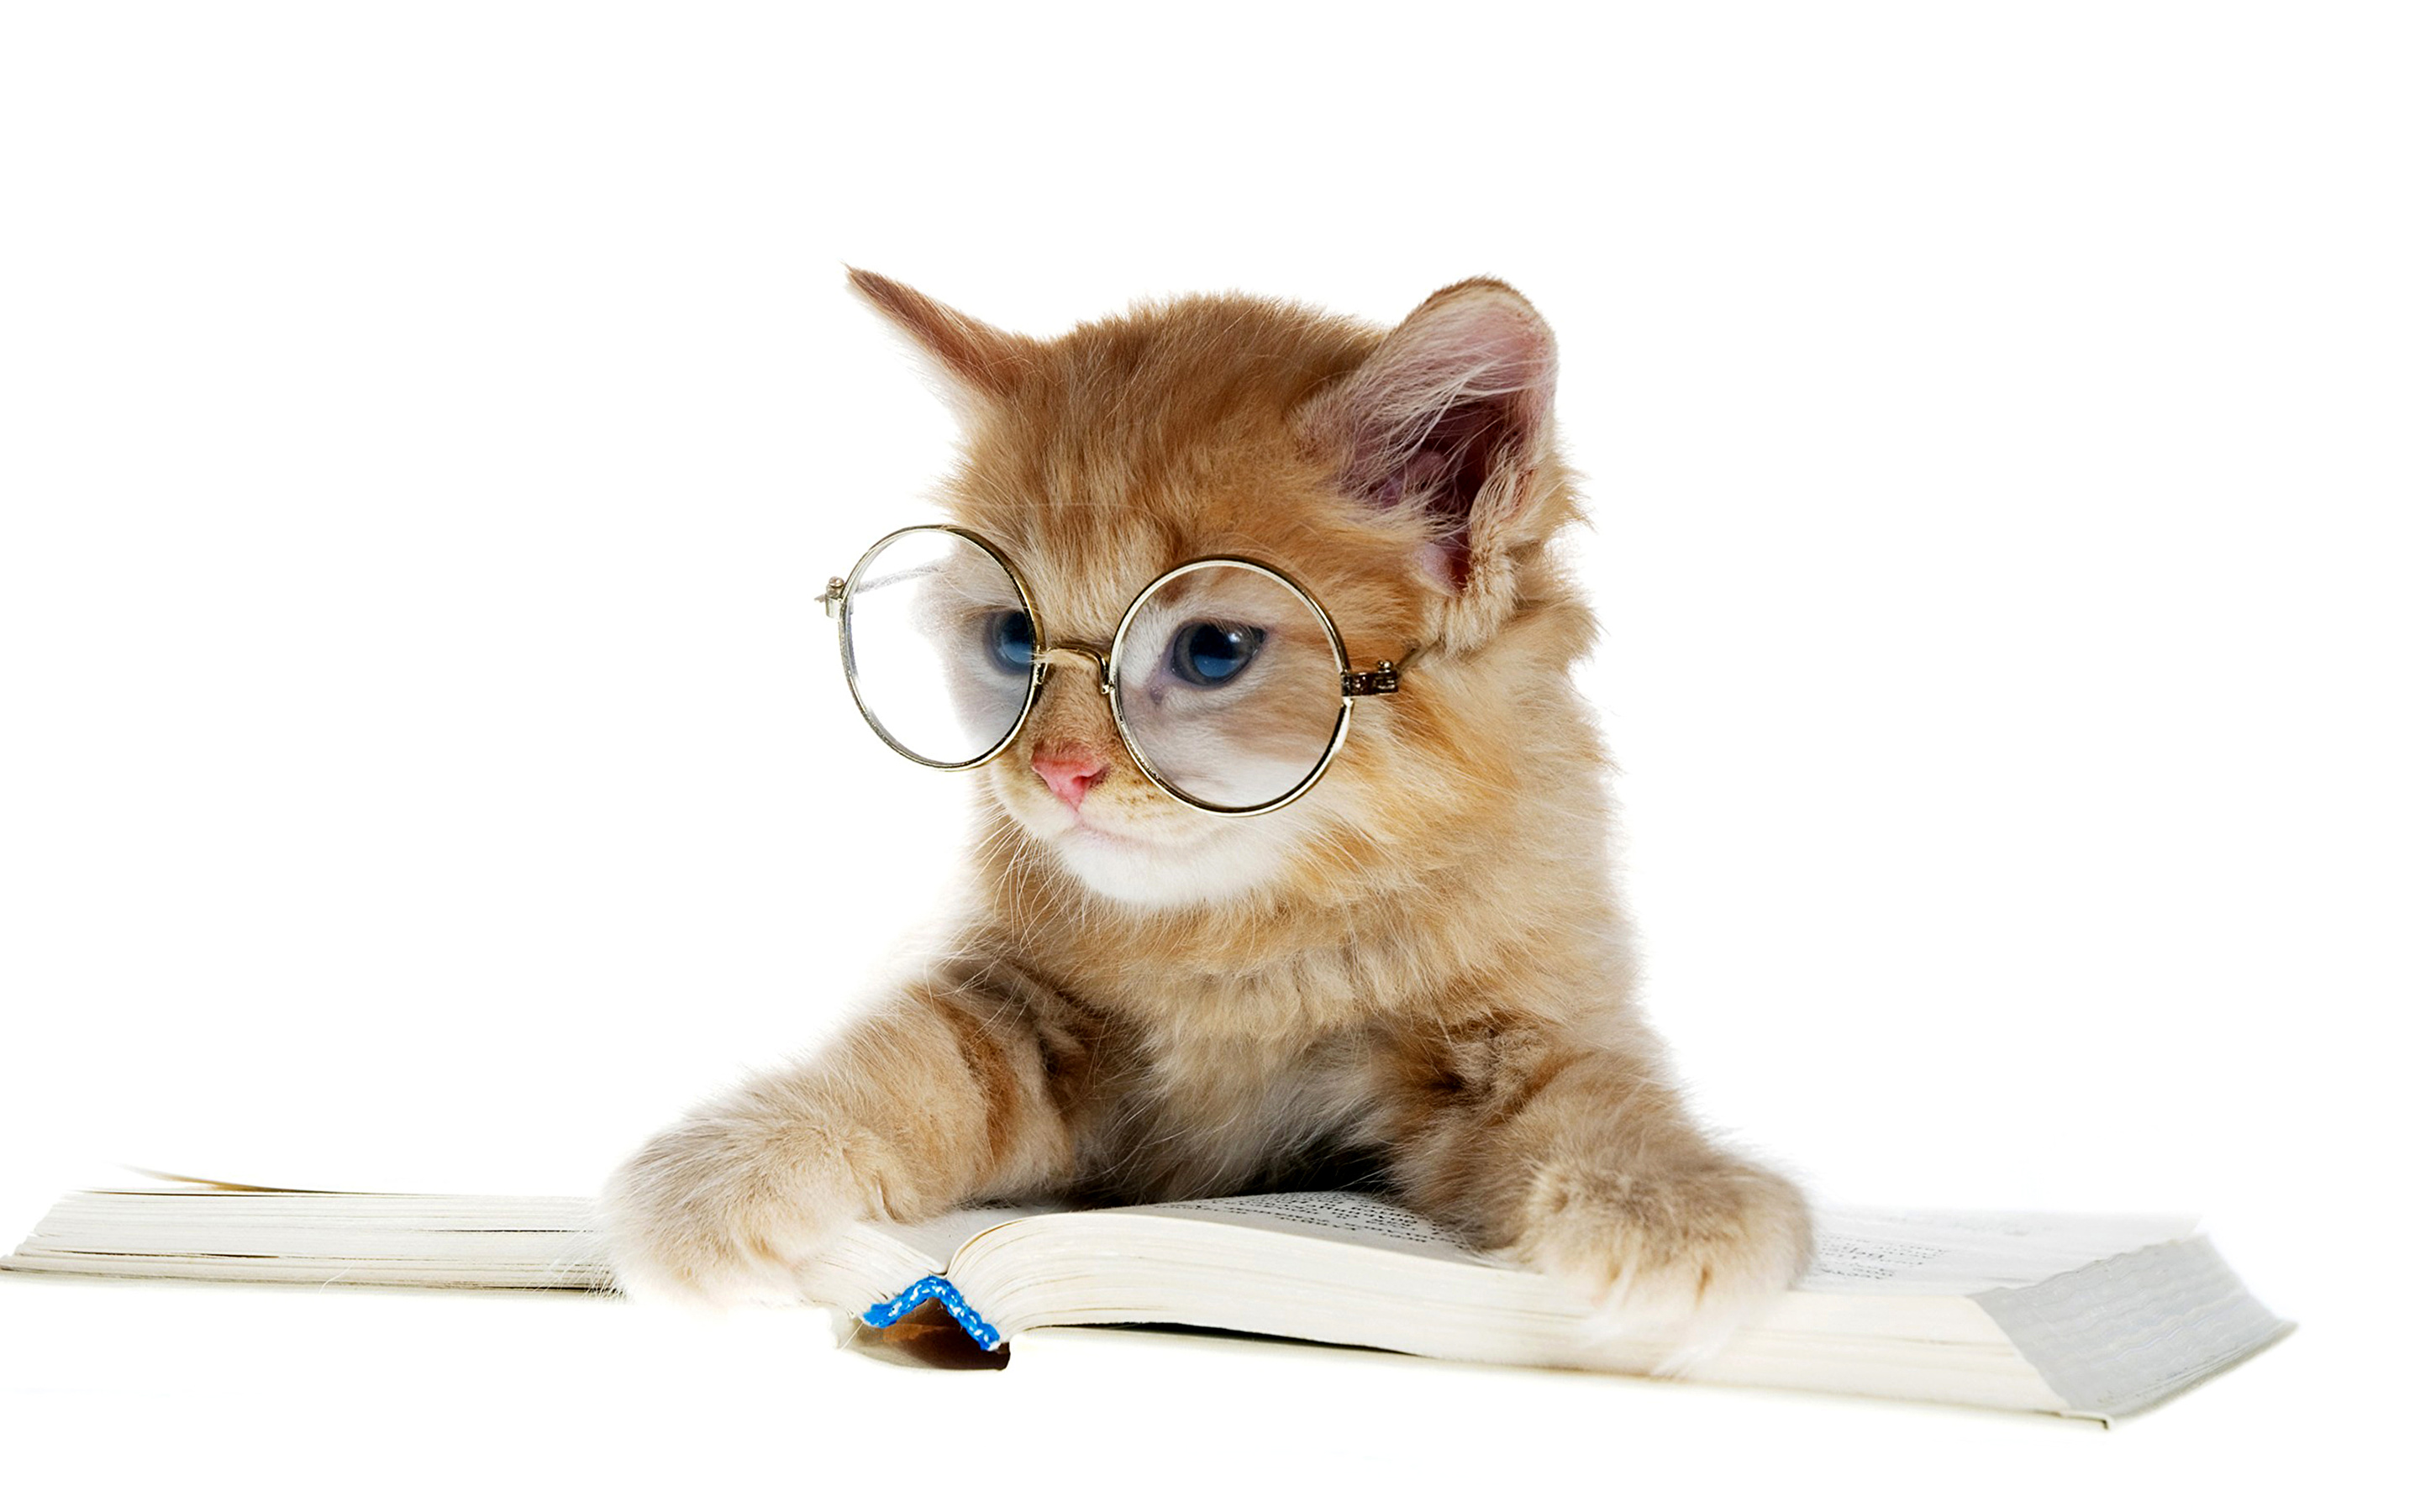 Kitten with classes, reading a book